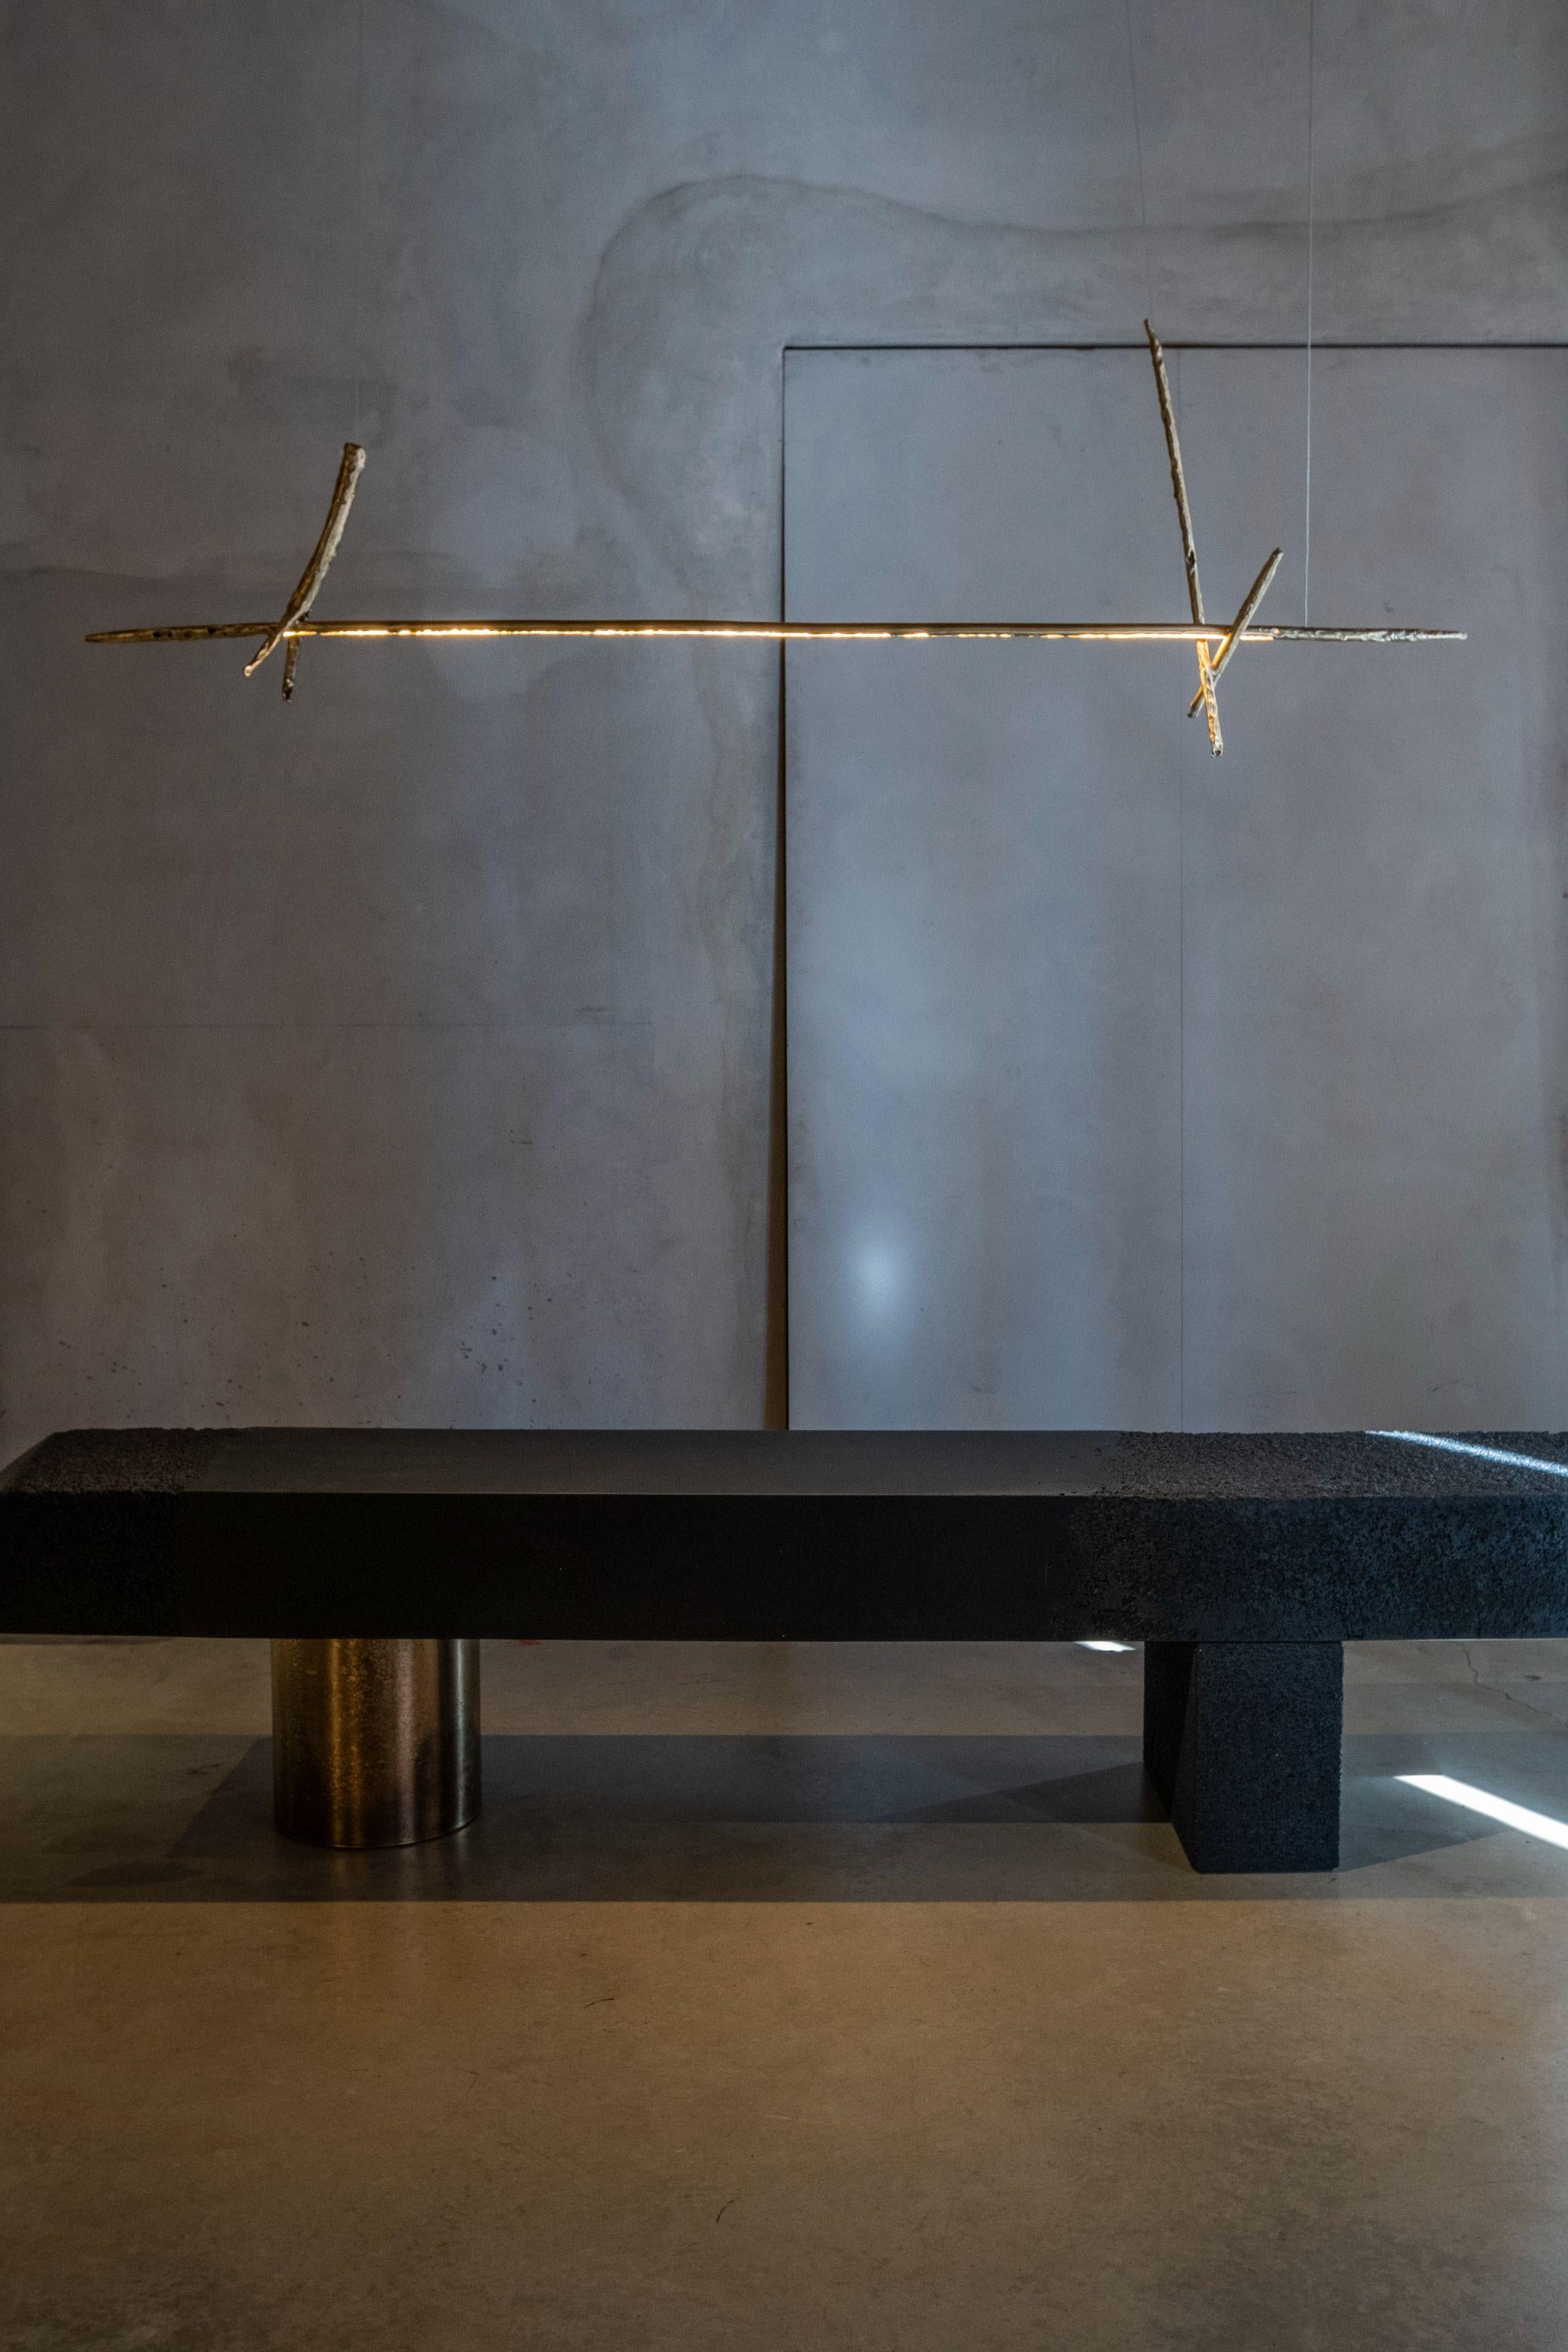 Prometeo chandelier by Morghen Studio
Materials: Brass, LED light, silicone
Dimensions: 165 x 20 x 50 cm
Light source: LED 24v - 20 w - 2.500 lm - 2.700/3.000 k - dimmable

Prometeo is a Collection of objects arisen from the research on a return to